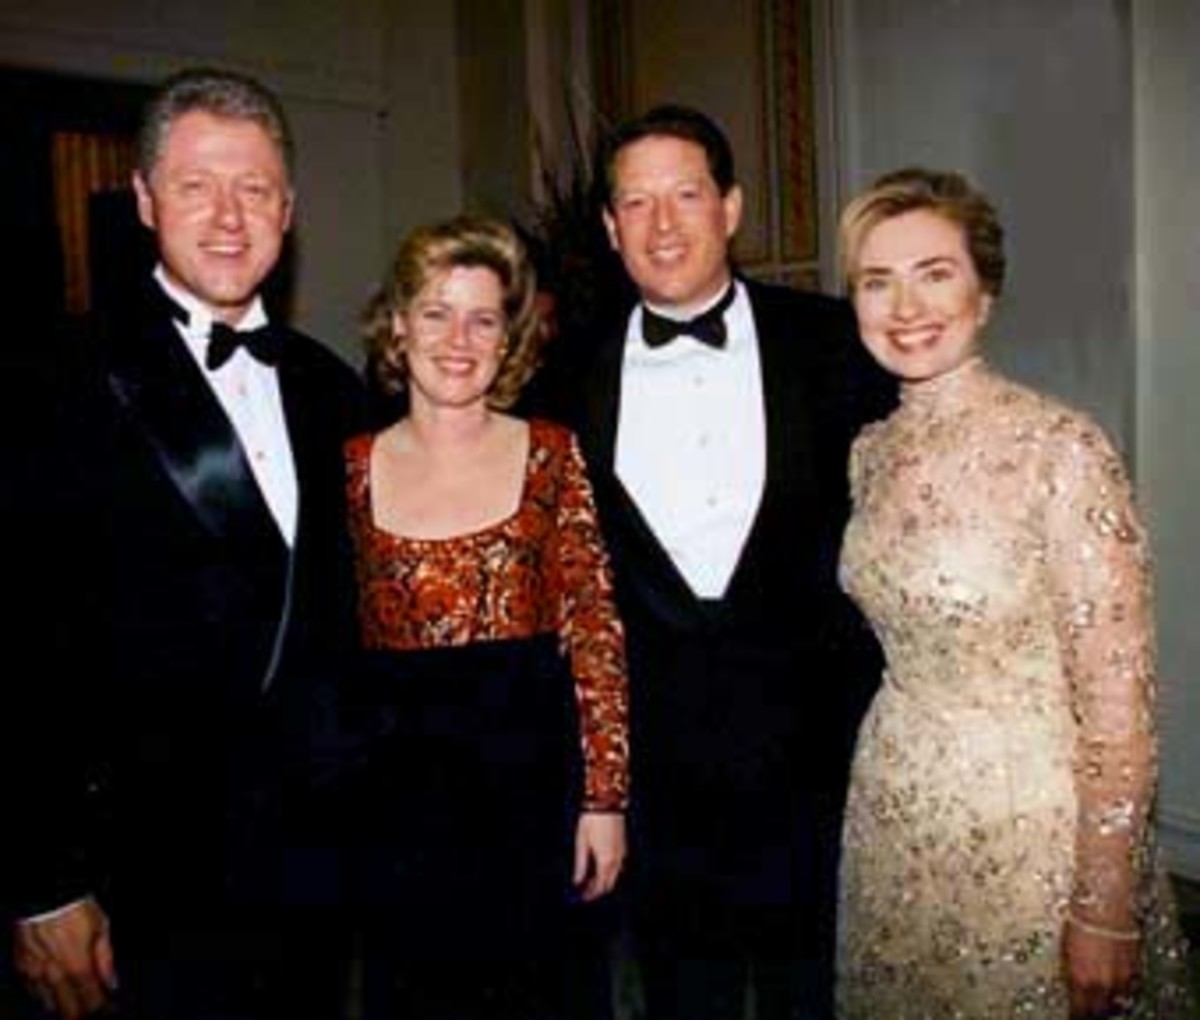 william-clinton-42nd-president